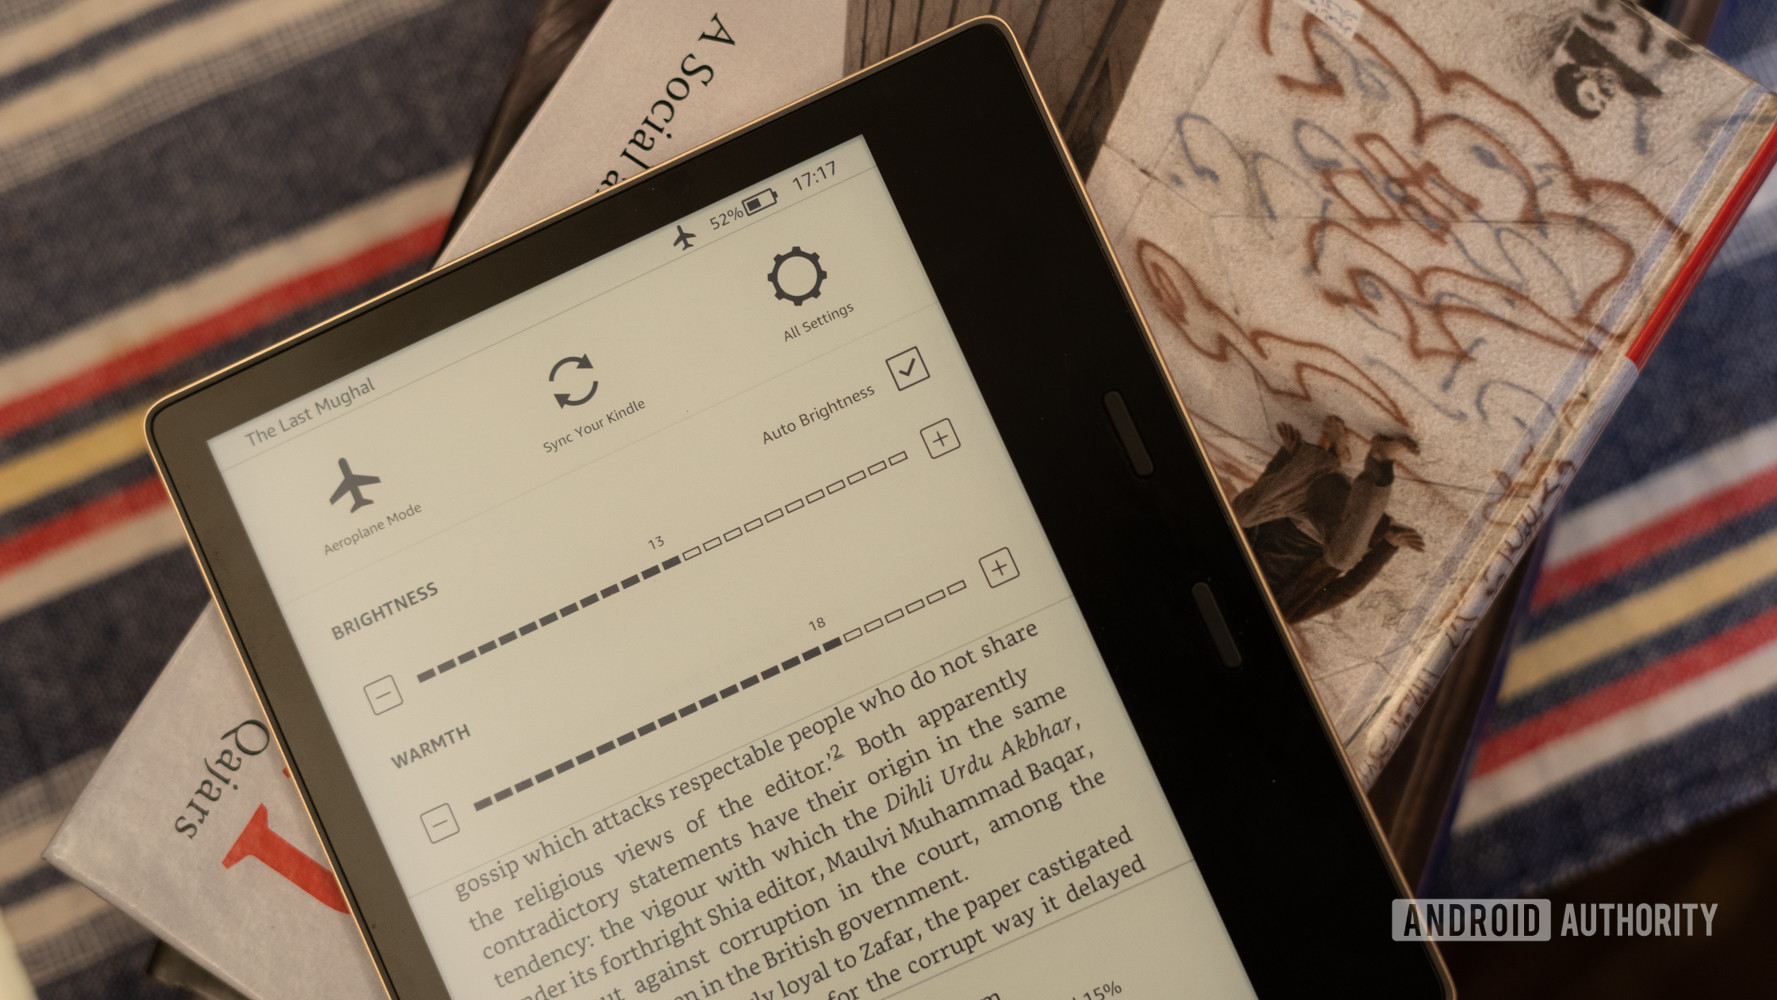 Amazon Kindle Oasis with warmth and brightness slider